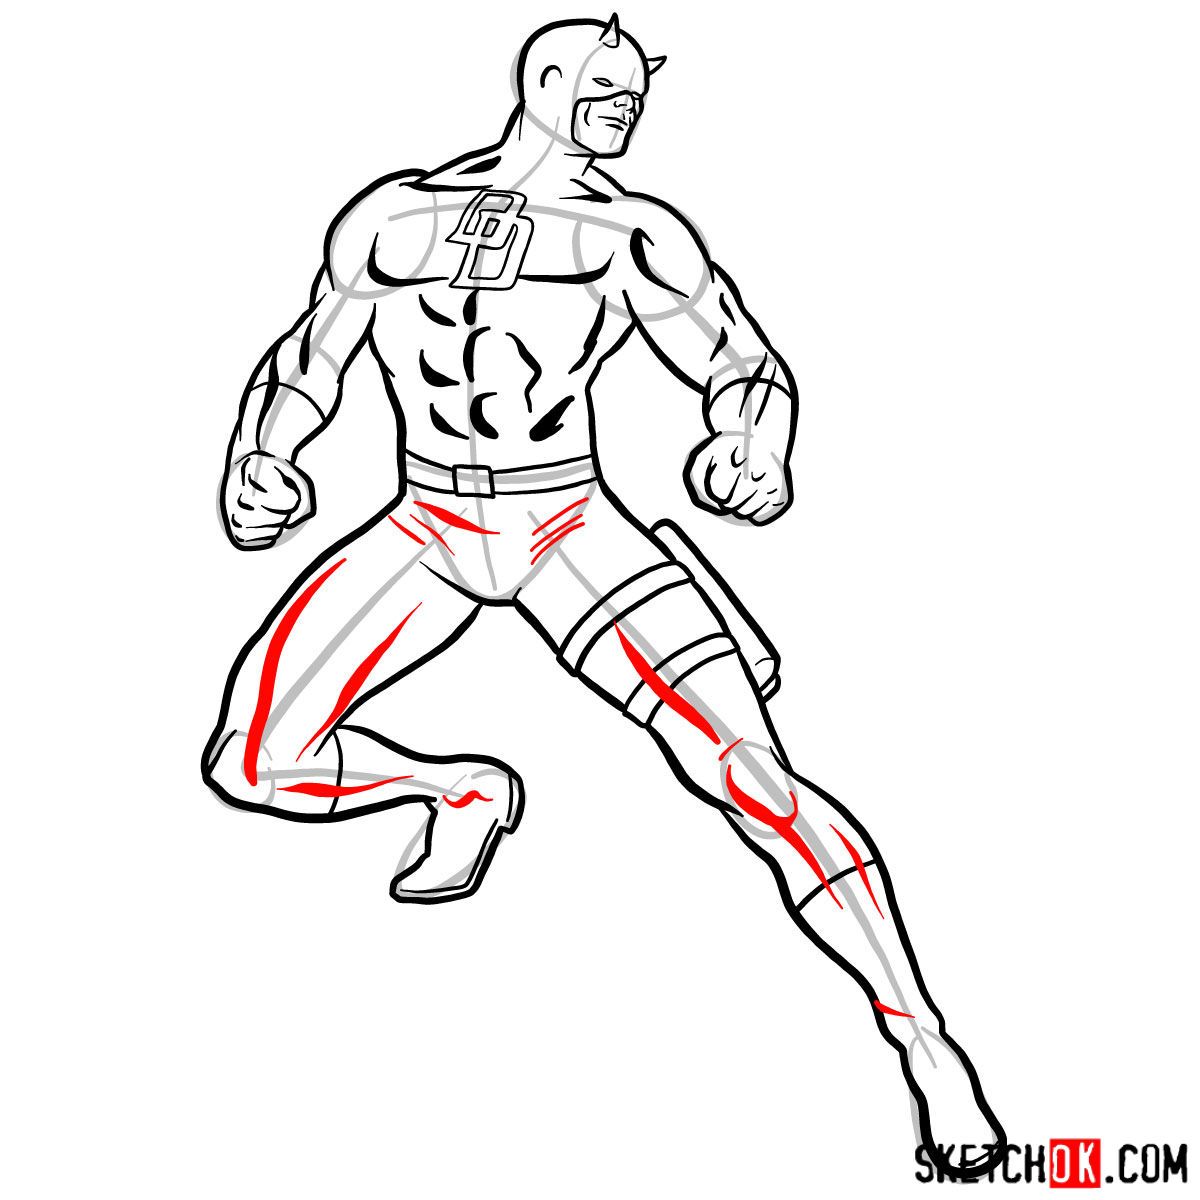 How to draw Daredevil from Marvel - step 12